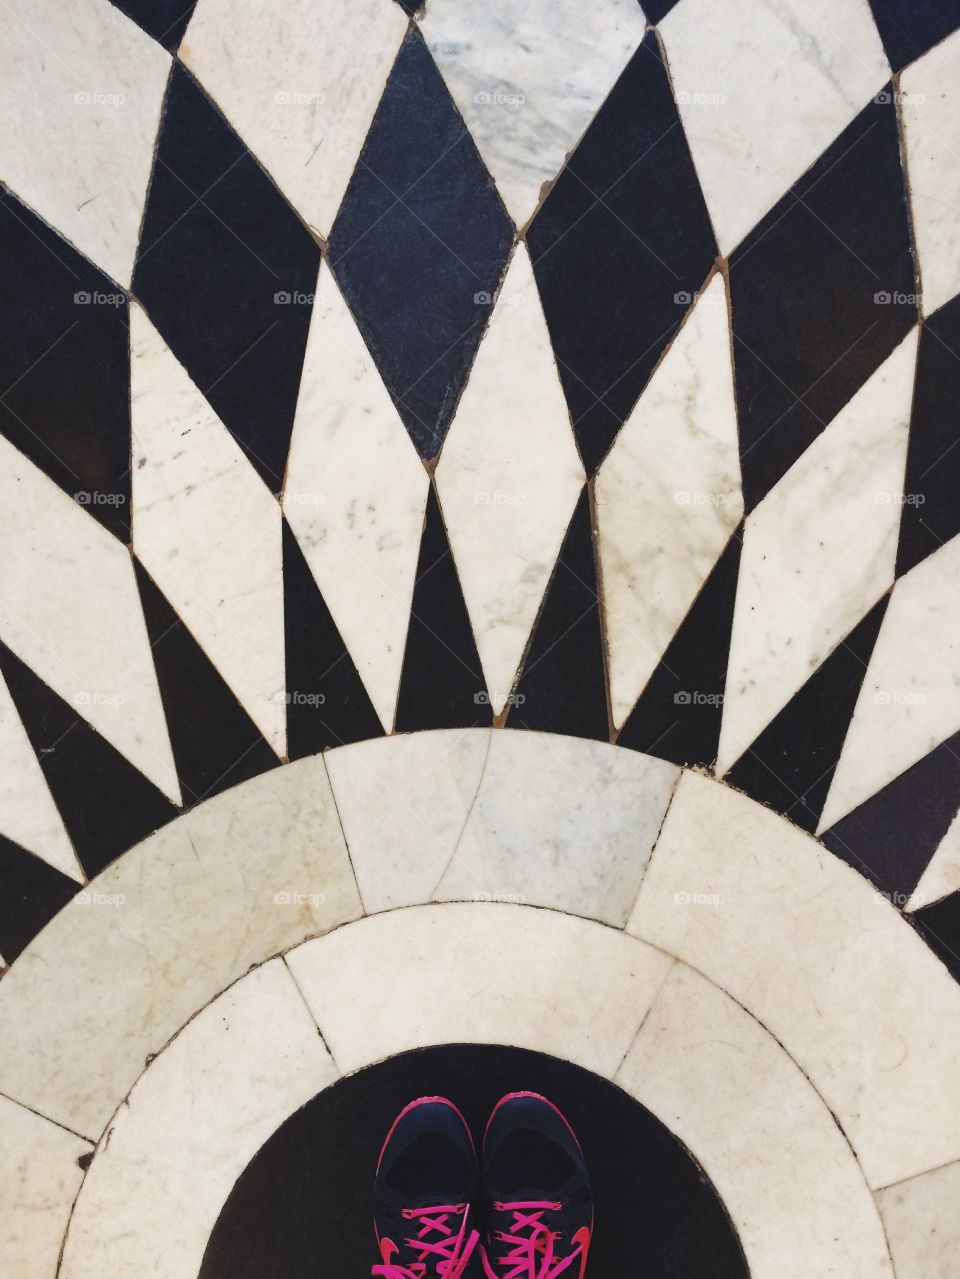 This photo was taken in London , in Queens House. Beautiful floor tiles inspired me to take this capture.